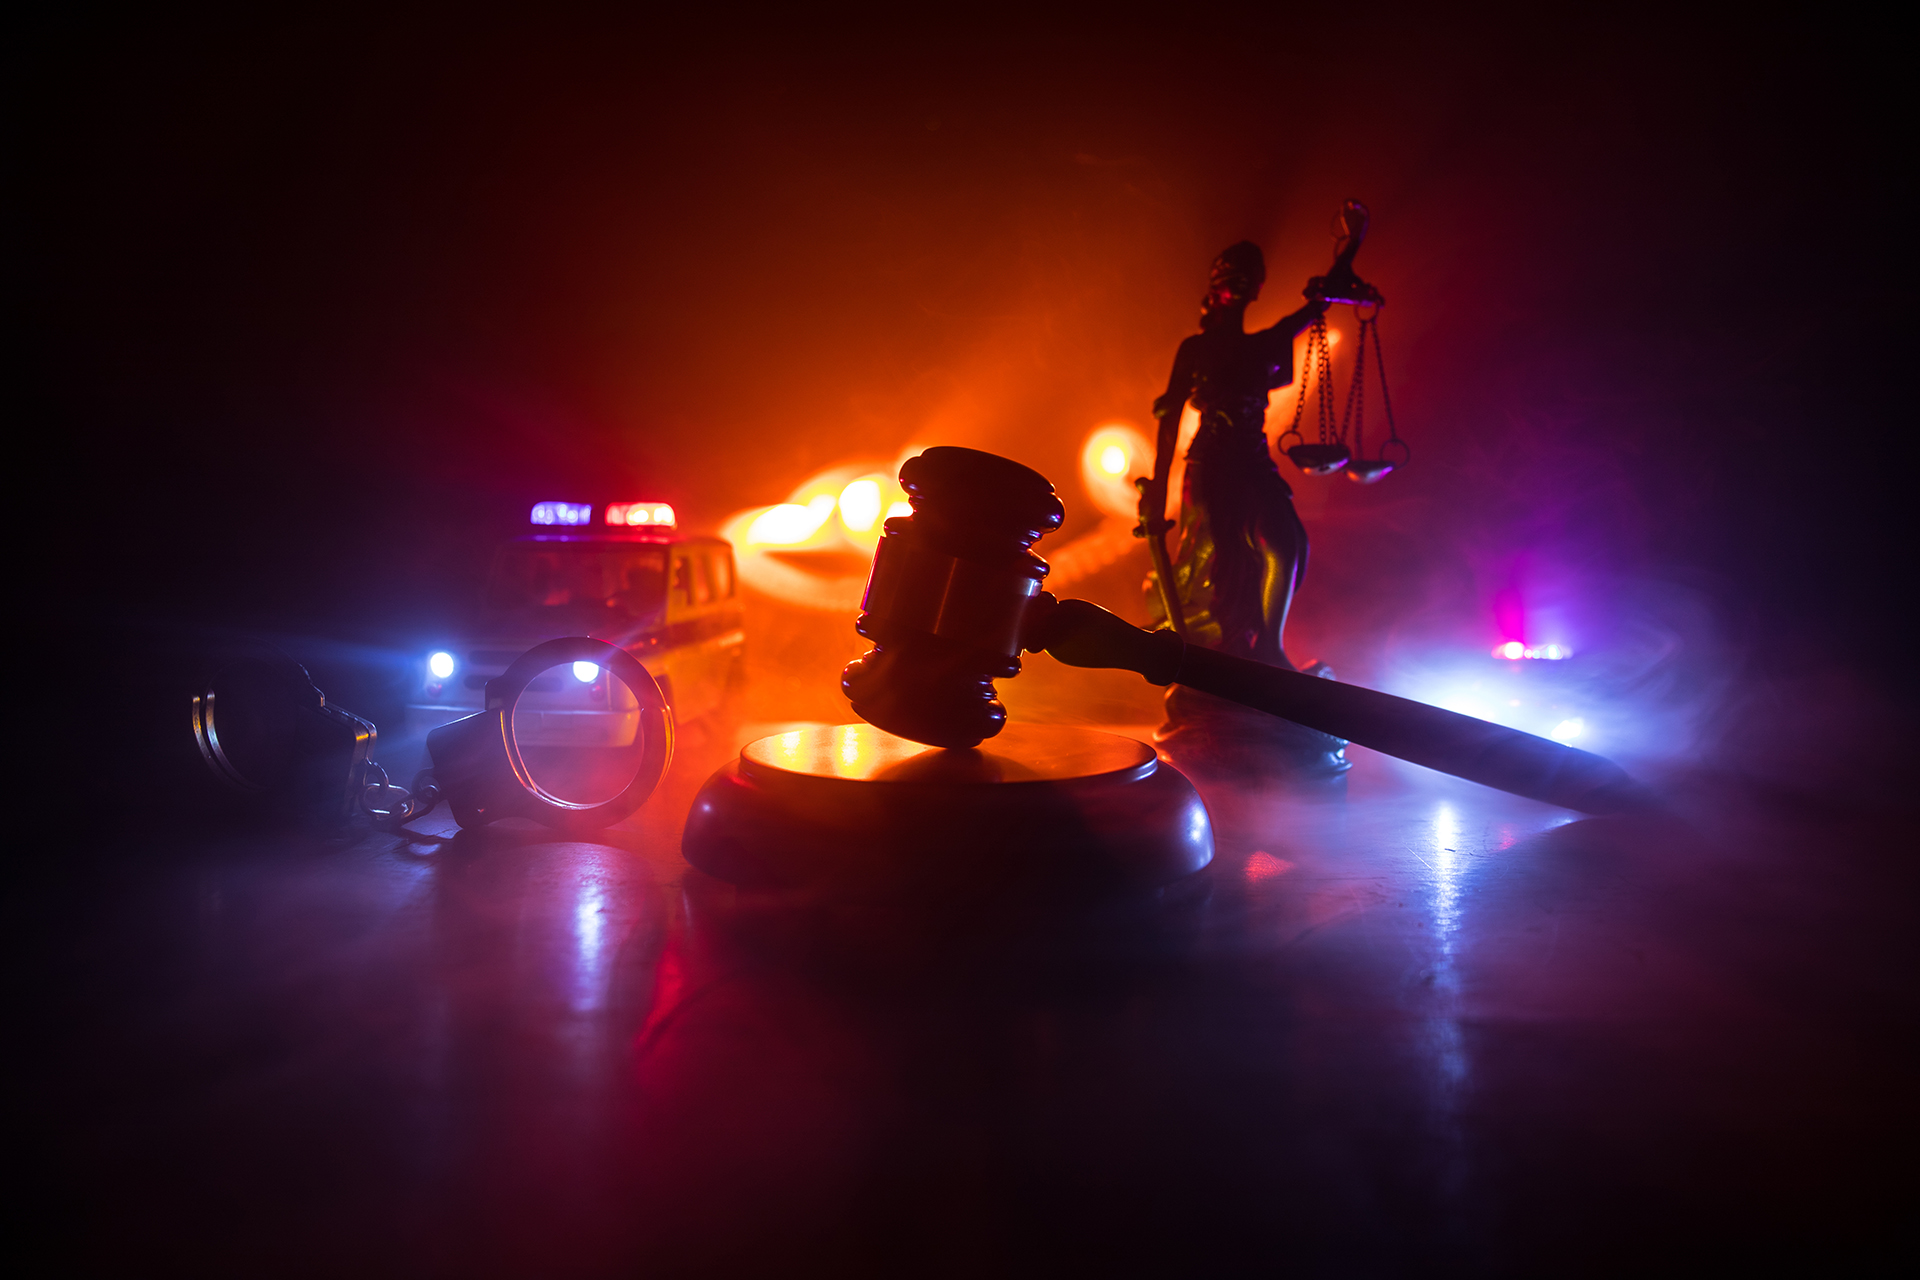 A gavel in front of a smokey background of a police car lights and a statue of a blindfolded lady holding a sword and scales.